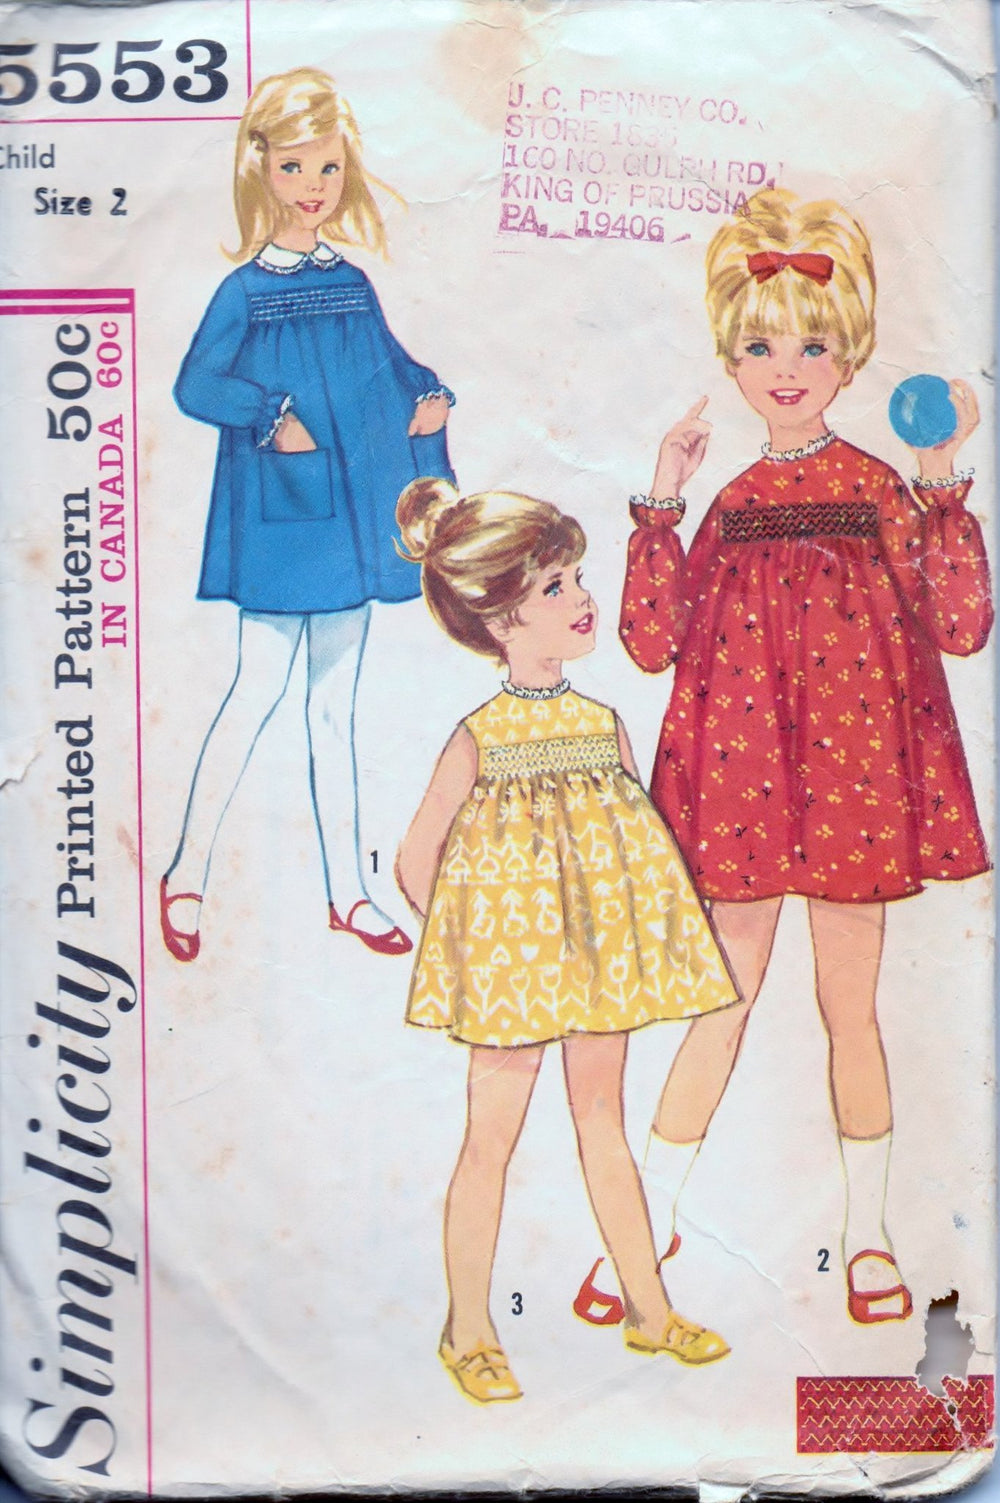 Simplicity 5553 Little Girls Toddler One Piece Dress Detachable Collar Vintage 1960's Sewing Pattern - VintageStitching - Vintage Sewing Patterns